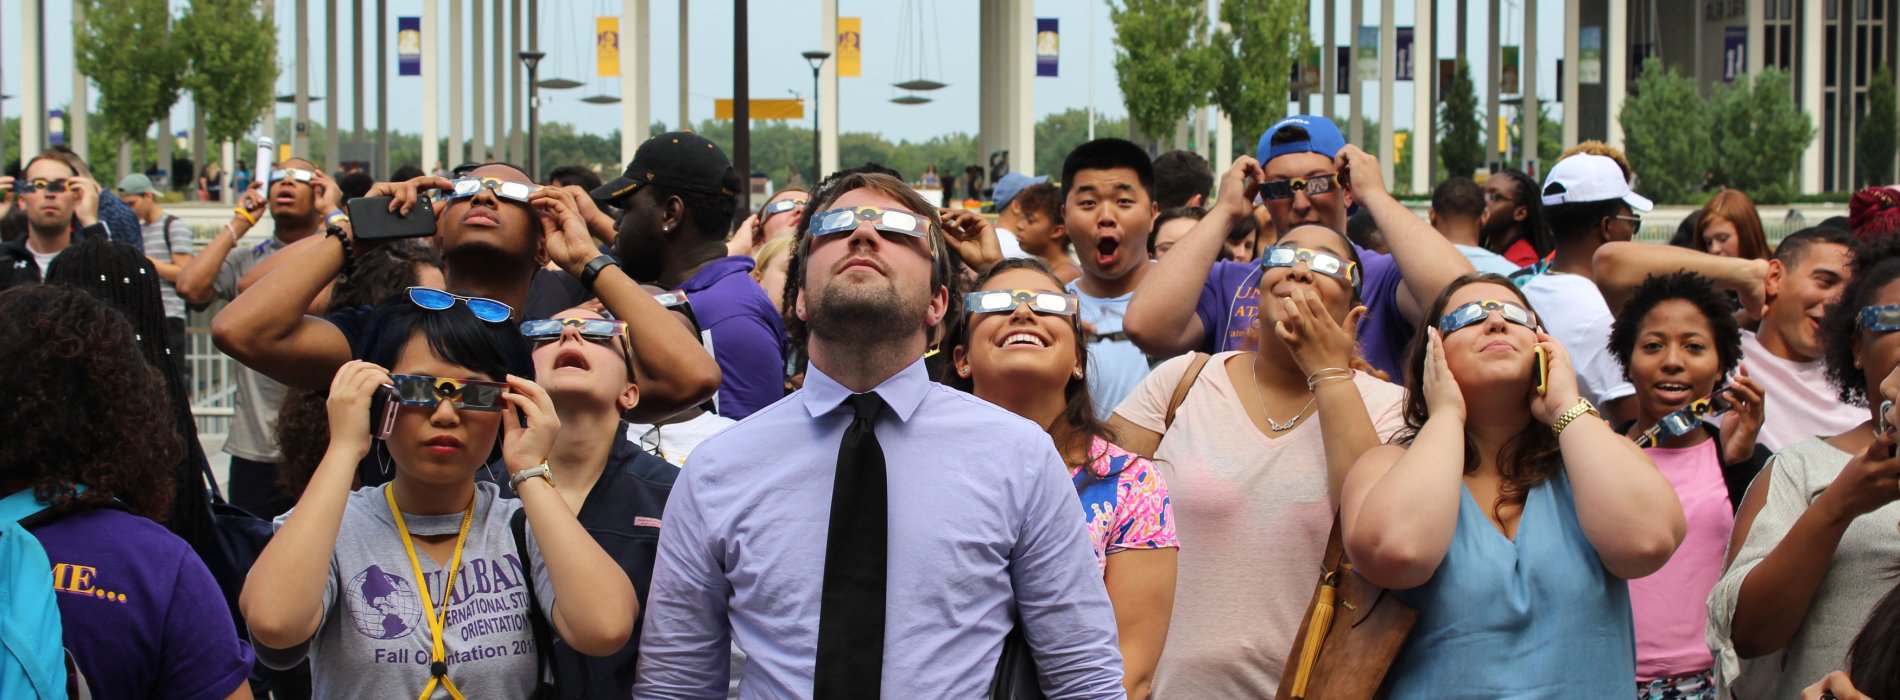 A crowd of people wearing eclipse glasses looks up at the sky ahead of the 2017 solar eclipse.